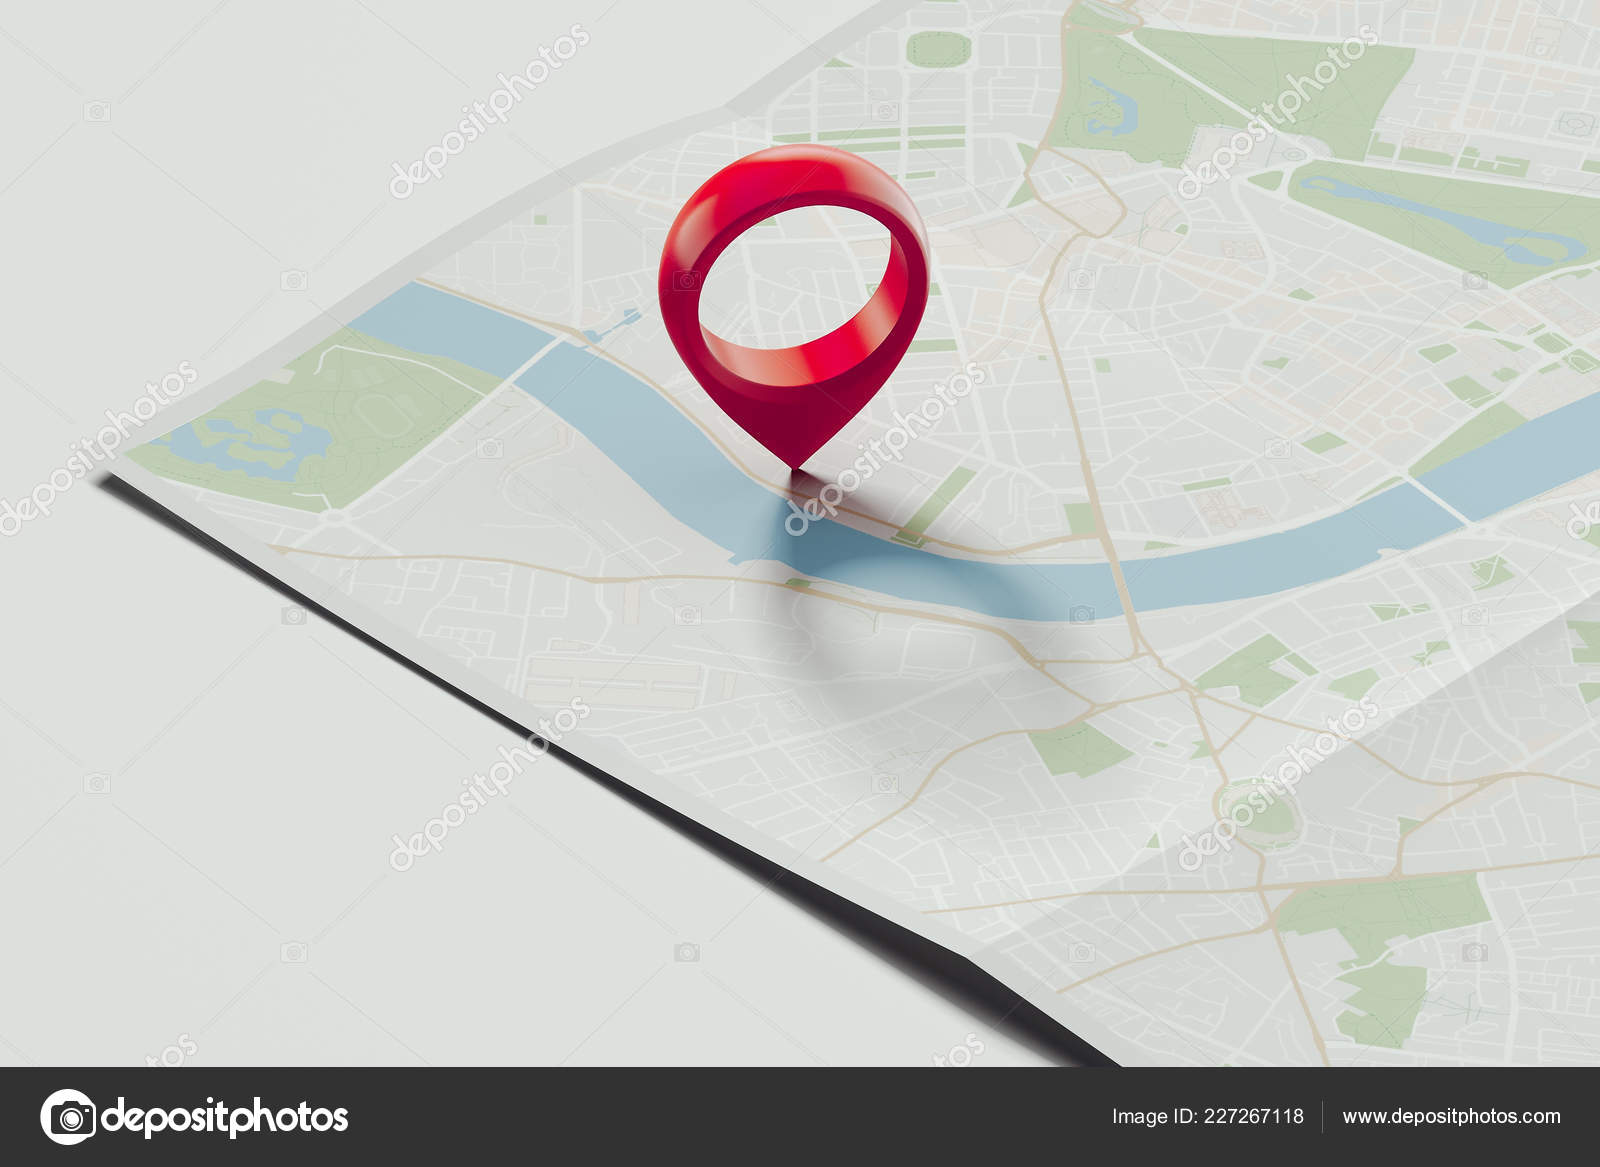 paralysis novelty Minimal Red geotag or map pin on realistic map. 3d rendering. Stock Photo by  ©ekostsov 227267118